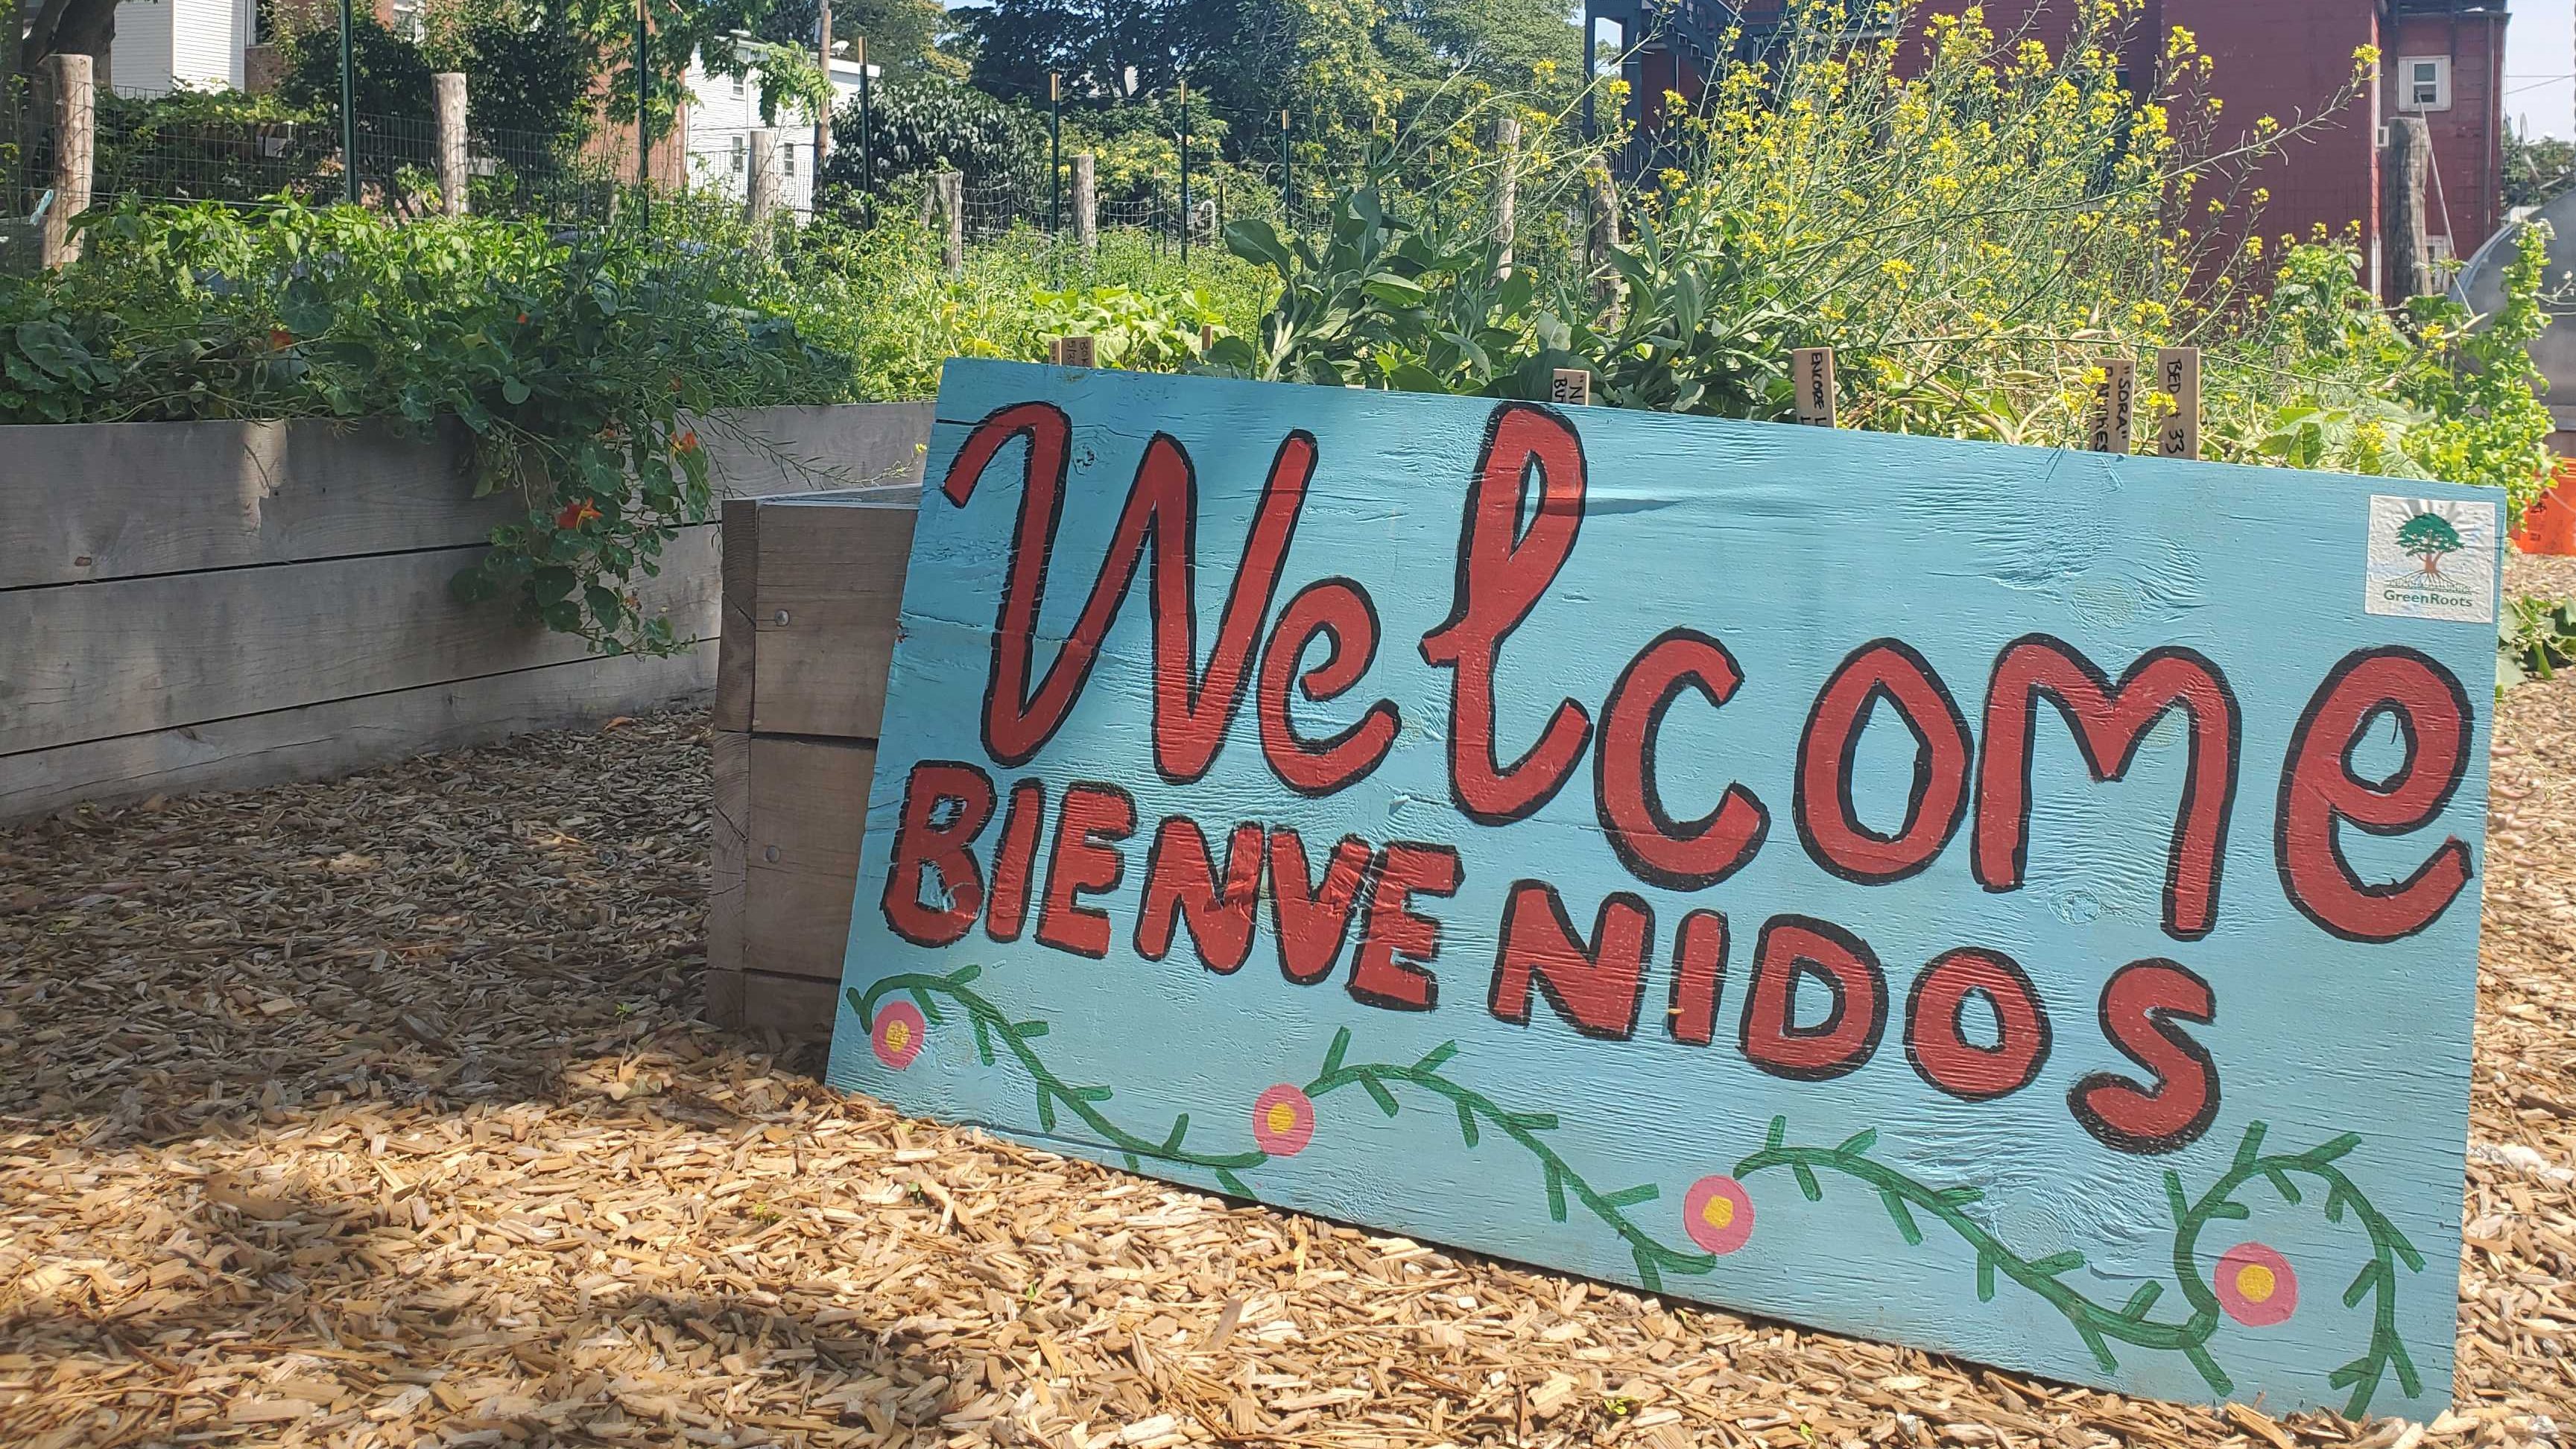 A sign resting on a wooden garden bed overflowing with green plants reads "Welcome, Bienvenidos."